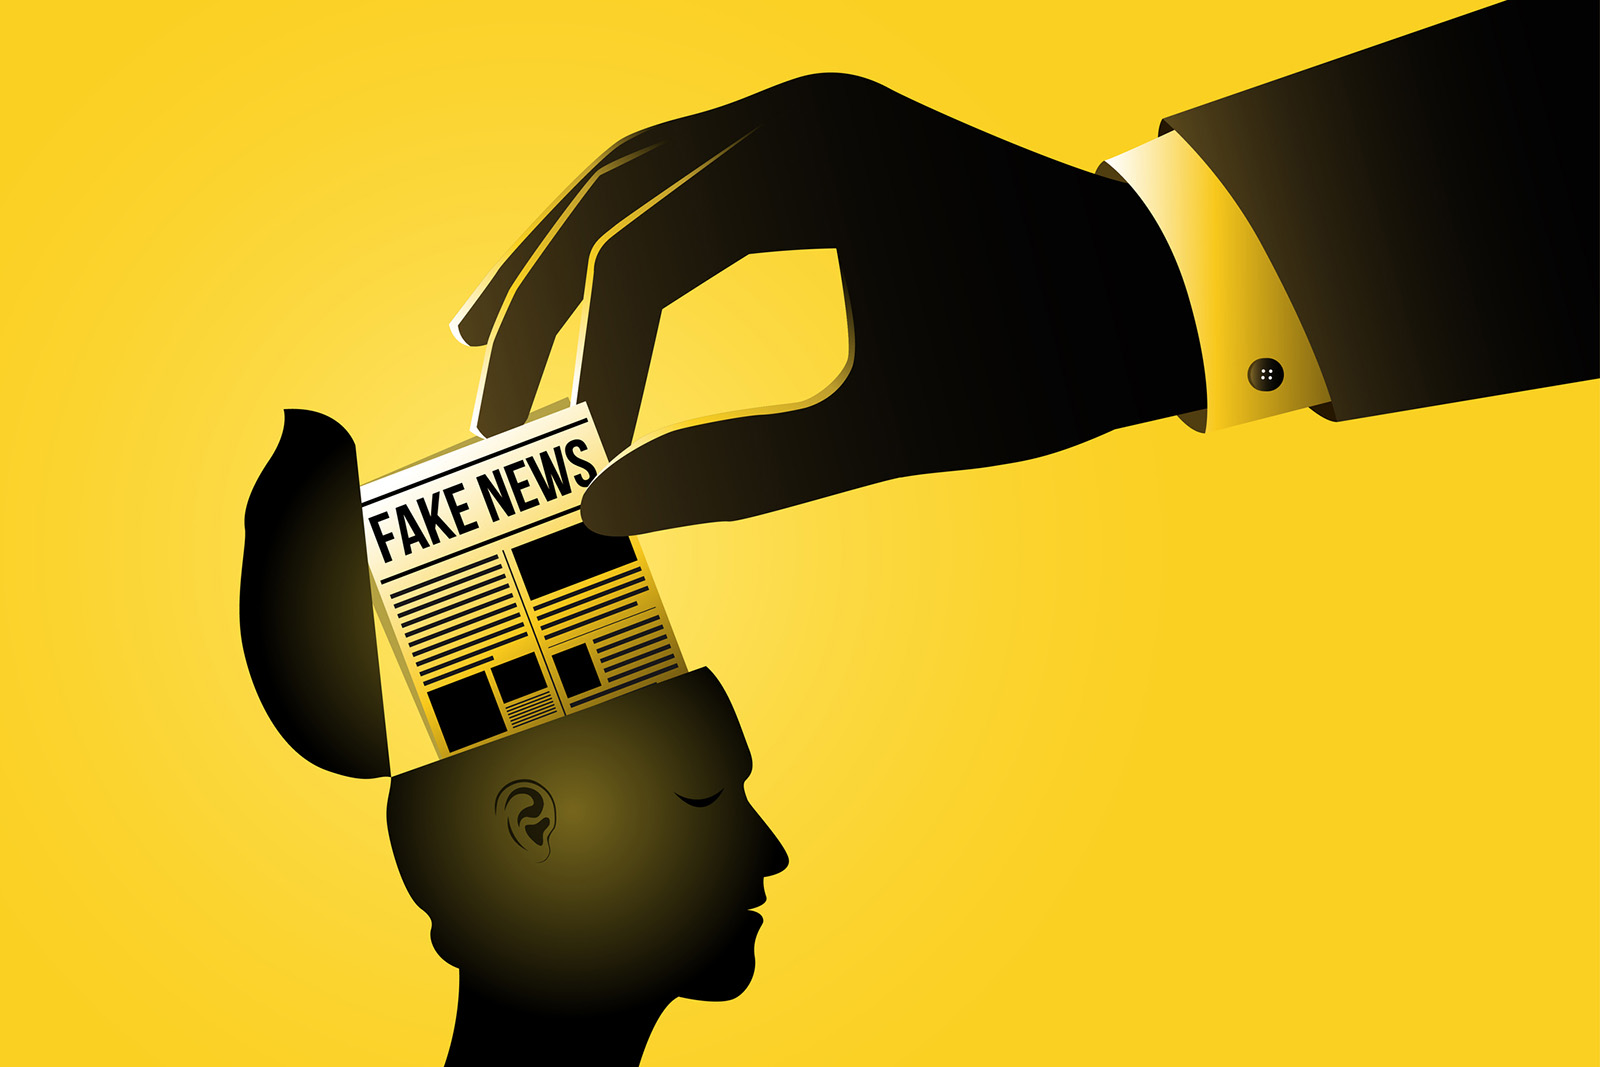 Graphic of a hand putting fake news into someone's head